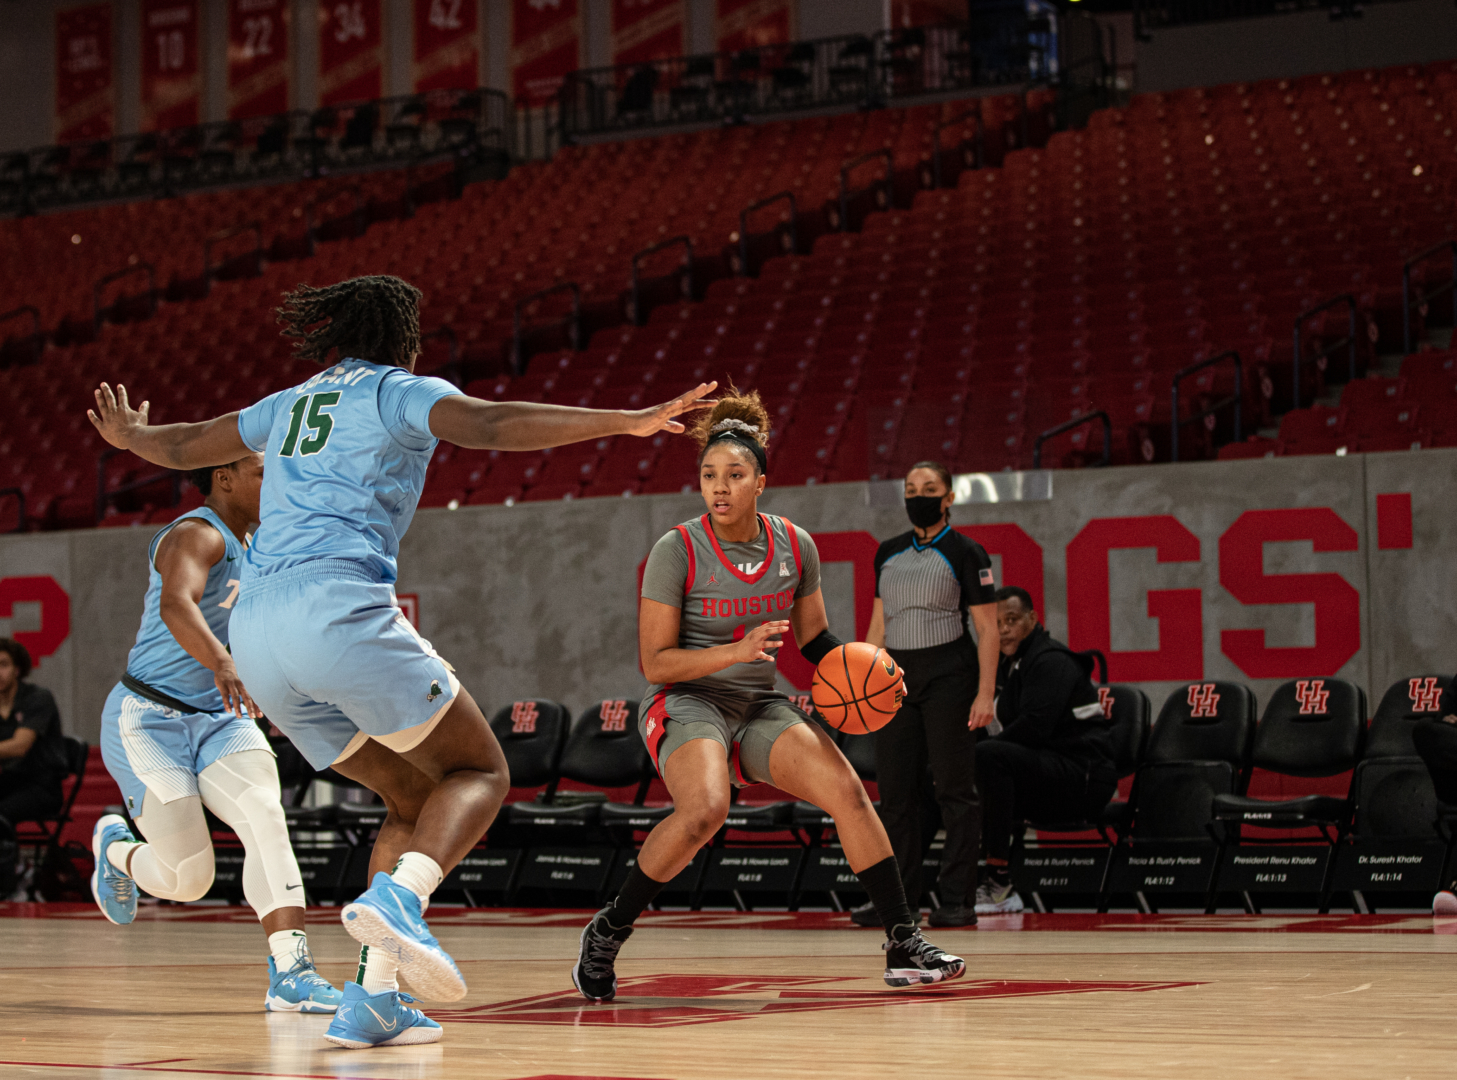 Sophomore guard Laila Blair’s 16 points powered UH women's basketball past ECU on Wednesday night. | Sean Thomas/The Cougar